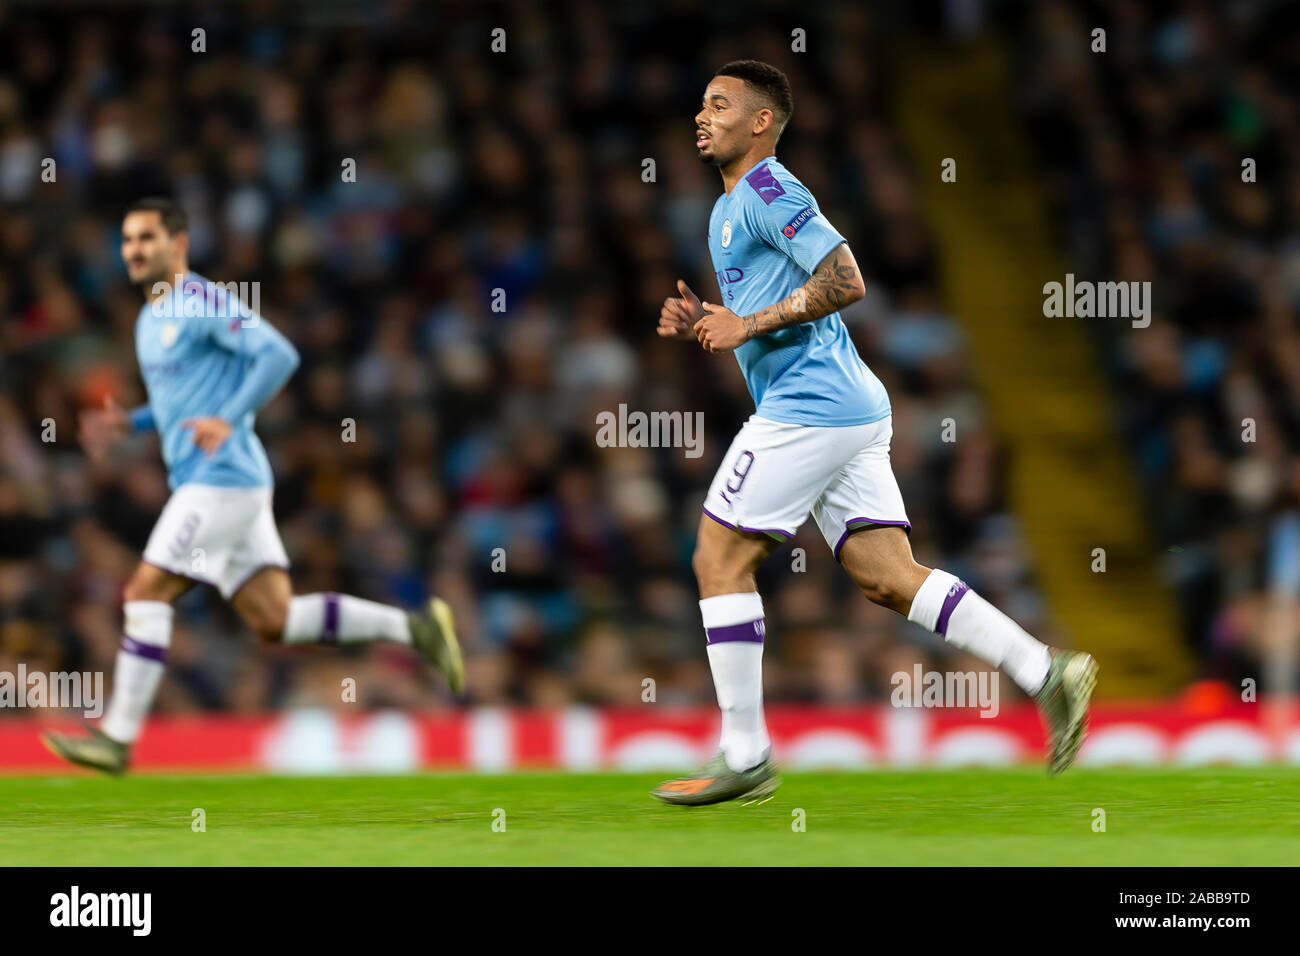 Manchester, UK. 26th Nov, 2019. Gabriel Jesus of Manchester City during the UEFA Champions League Group C match between Manchester City and Shakhtar Donetsk at the Etihad Stadium on November 26th 2019 in Manchester, England. (Photo by Daniel Chesterton/phcimages.com) Credit: PHC Images/Alamy Live News Stock Photo